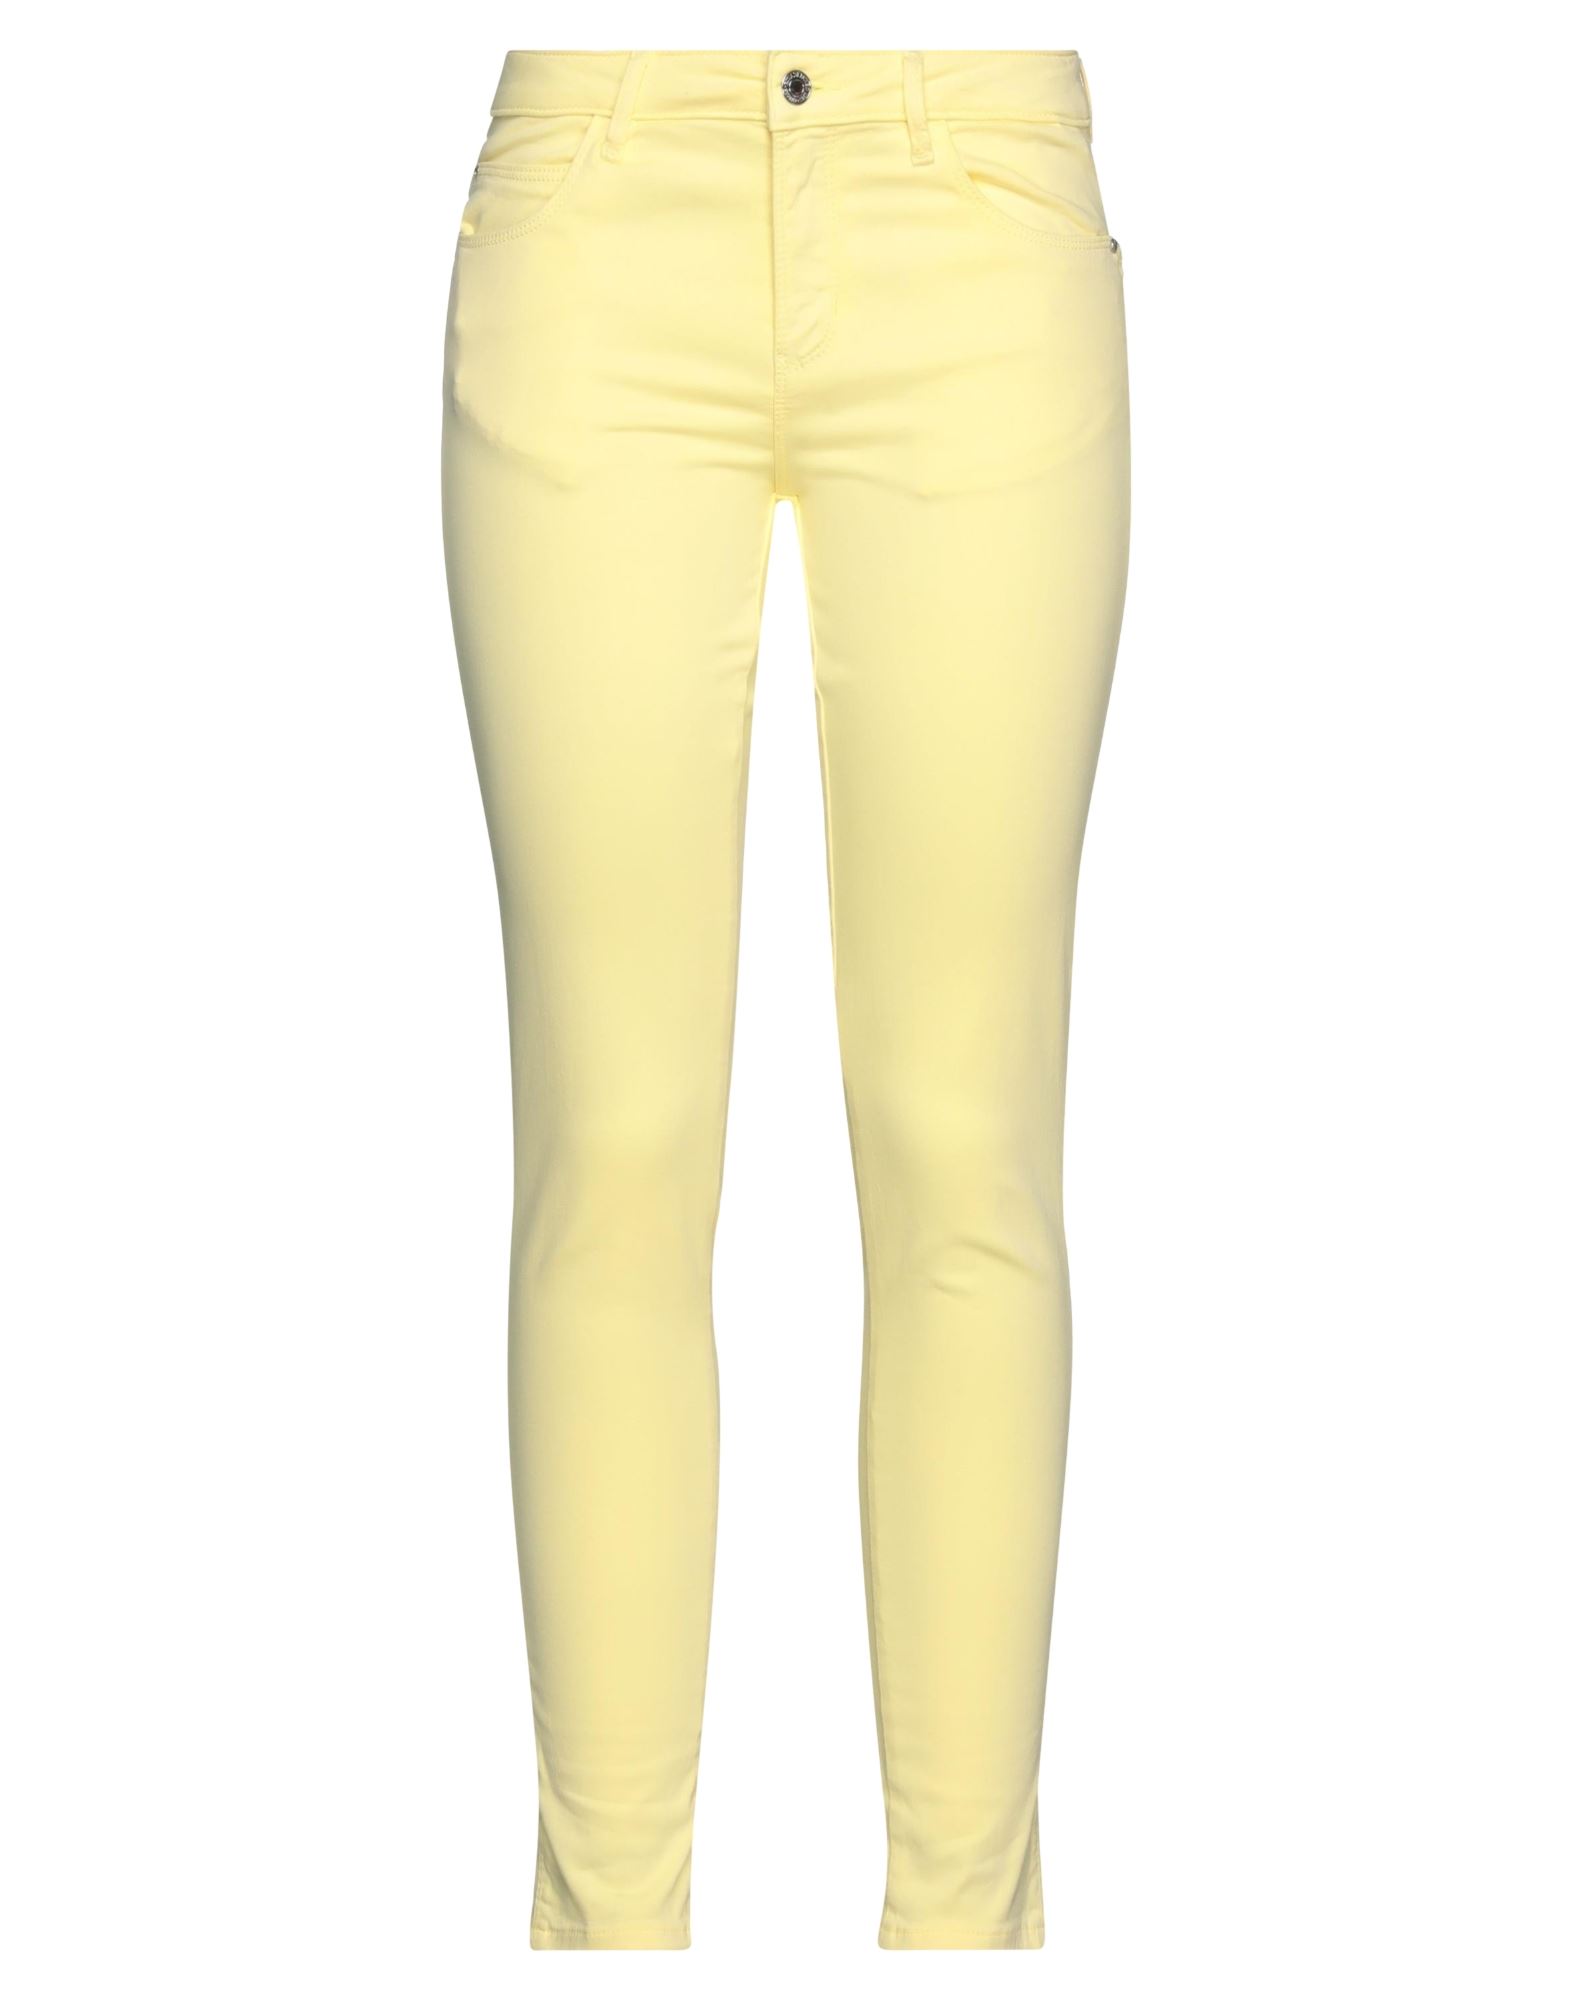 GUESS GUESS WOMAN PANTS YELLOW SIZE 27W-32L COTTON, ELASTOMULTIESTER, ELASTANE